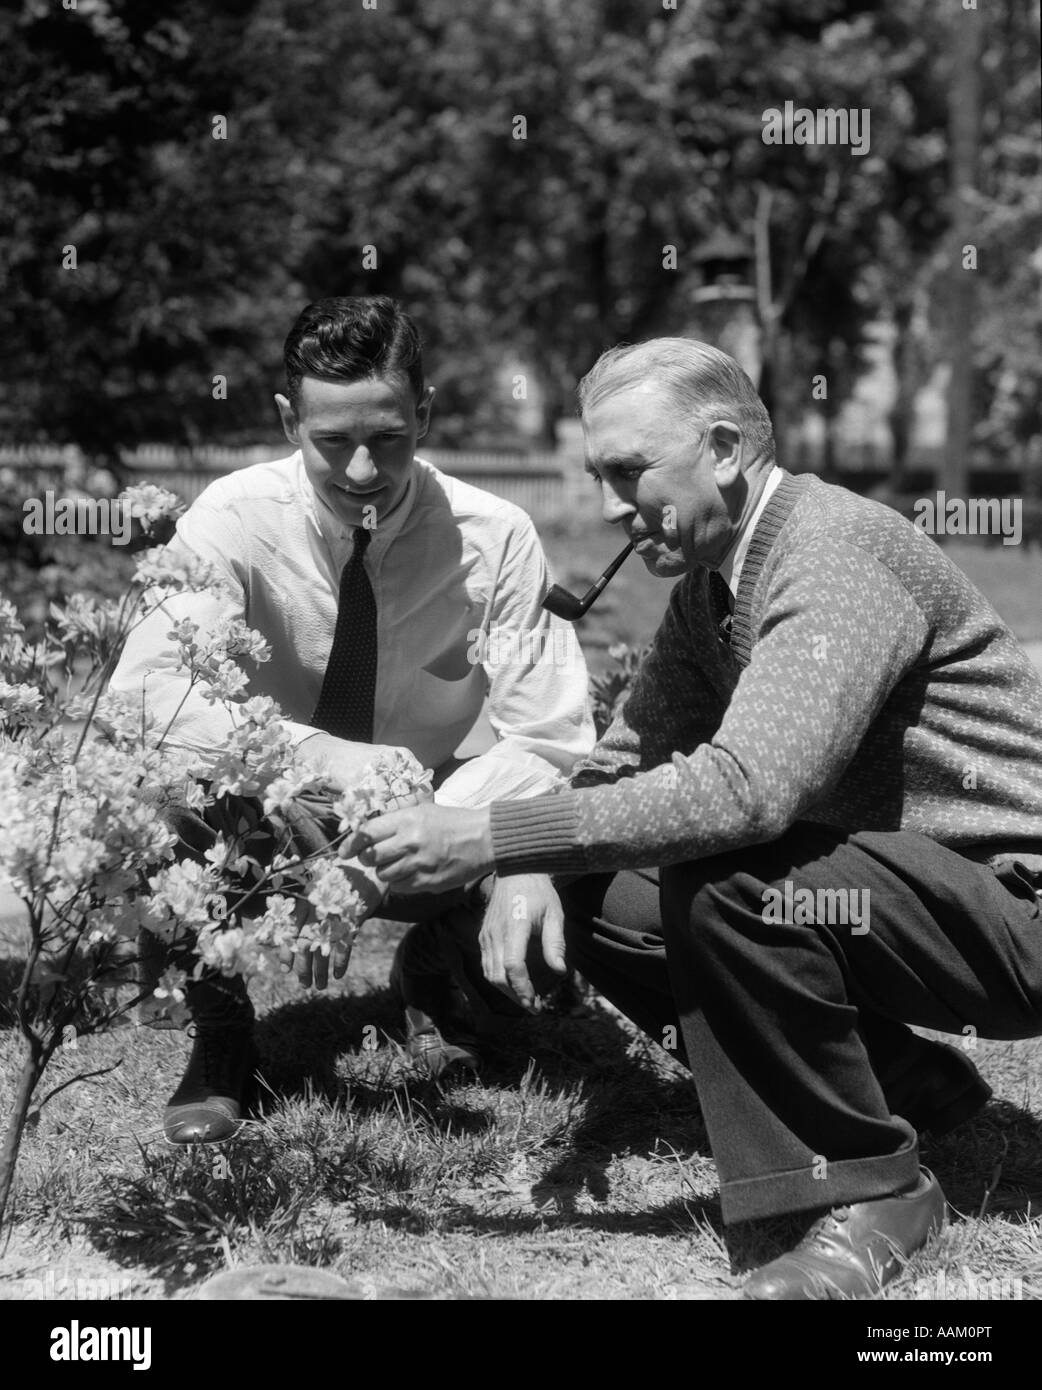 1930s 1940s 2 ADULT MEN FATHER & SON KNEELING IN GARDEN LOOKING AT FLOWERING SHRUB Stock Photo